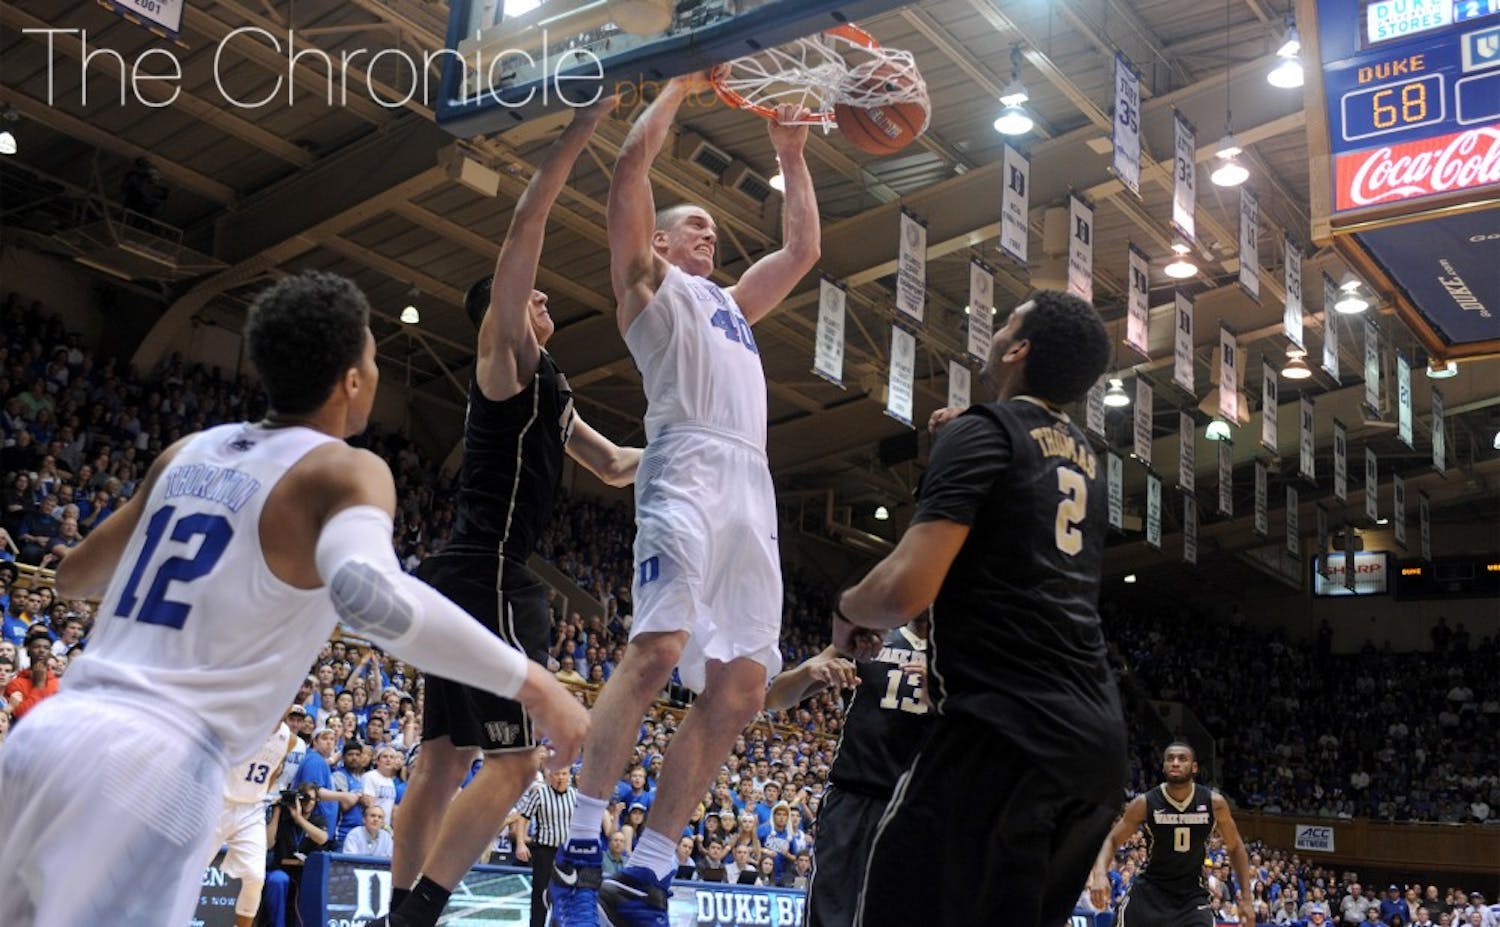 Center Marshall Plumlee’s Blue Devil career came to an end in the Sweet 16 last week, but he and his brothers provided several memorable moments in Cameron Indoor Stadium.